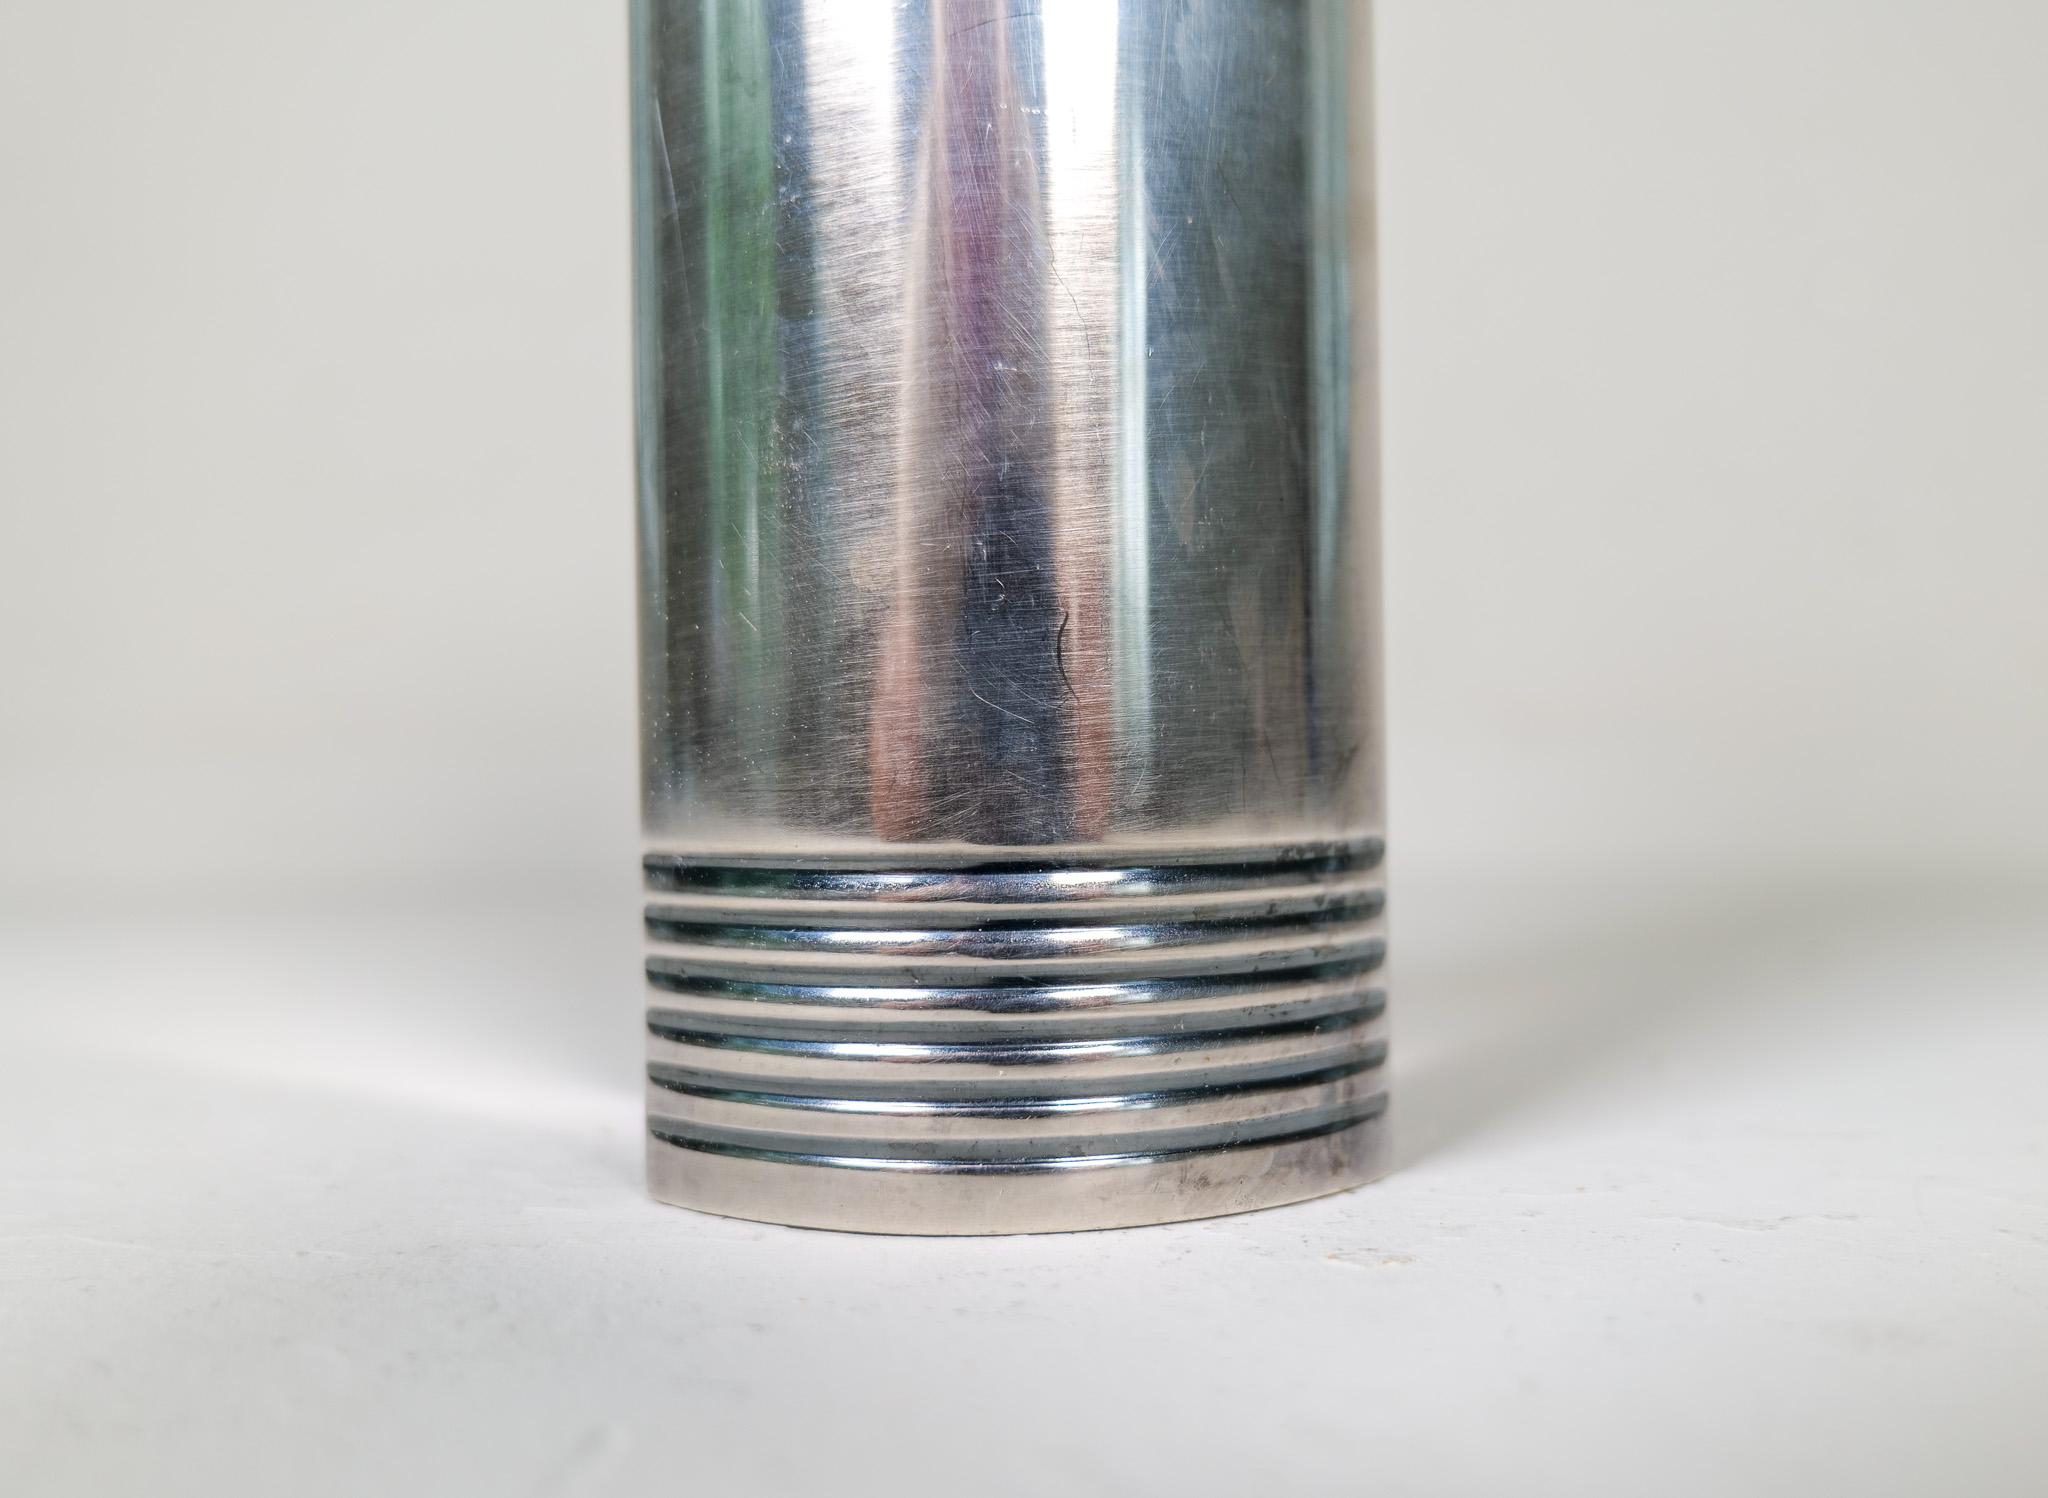 Mid-20th Century Art Deco Cocktail Shaker with 6 Small Glasses by Folke Arström, Sweden For Sale